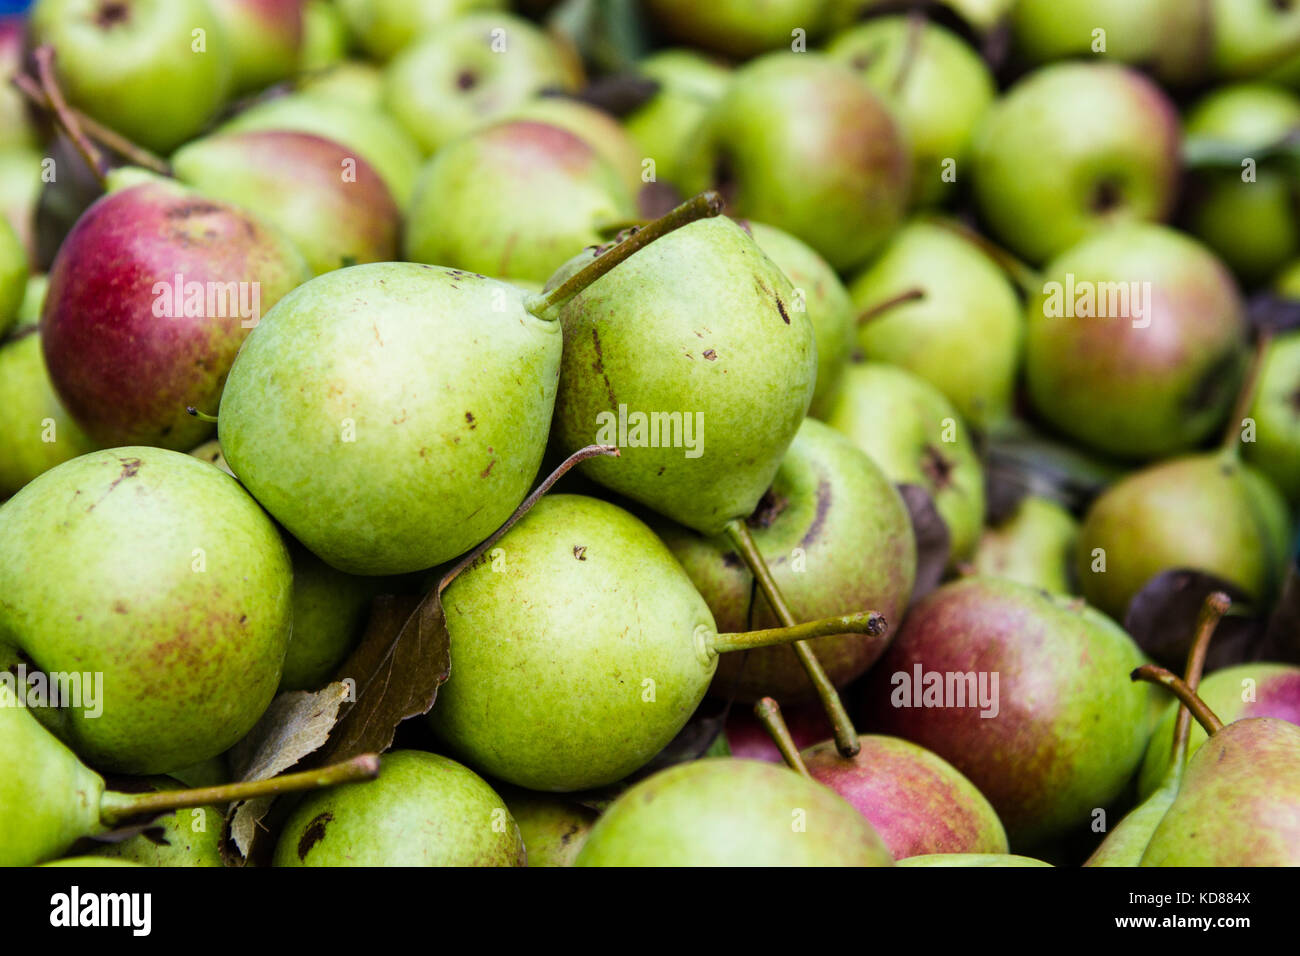 Pile of freshly picked pears at farmers market Stock Photo